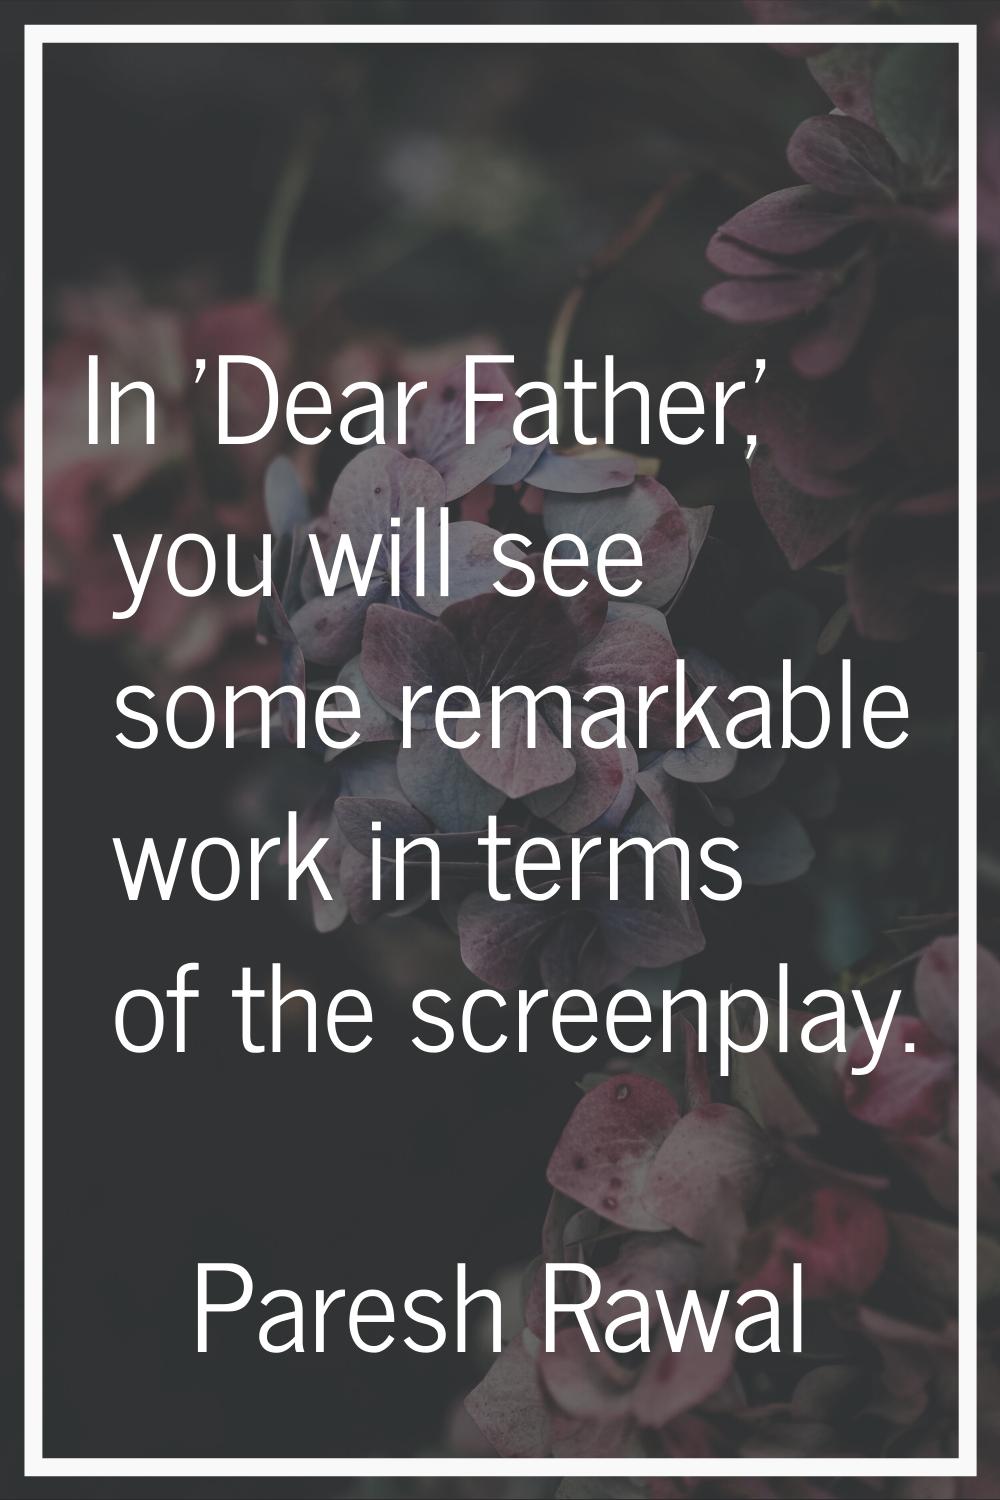 In 'Dear Father,' you will see some remarkable work in terms of the screenplay.